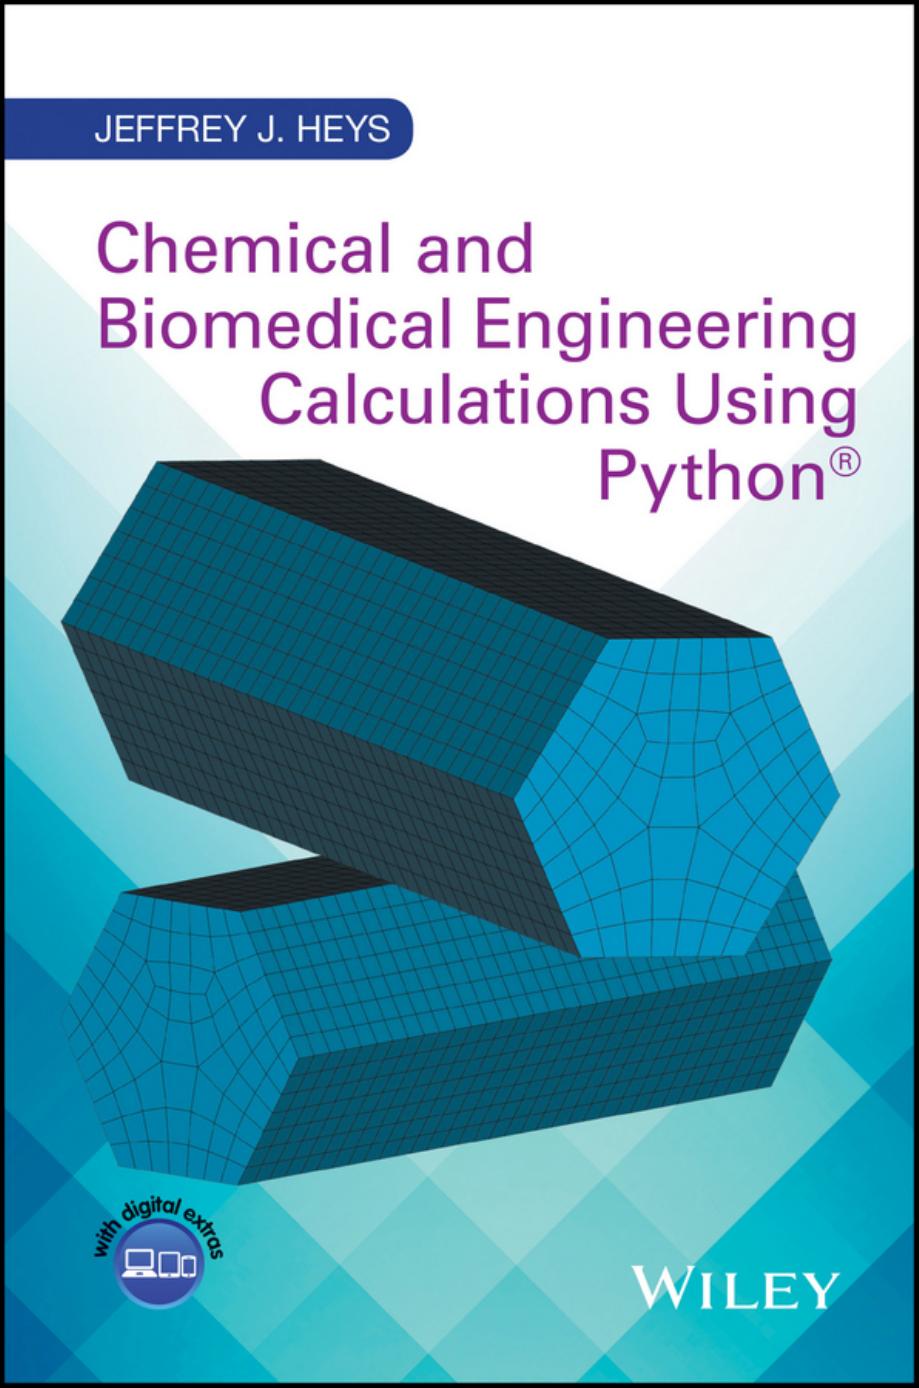 Chemical and Biomedical Engineering Calculations Using PythonⓇ